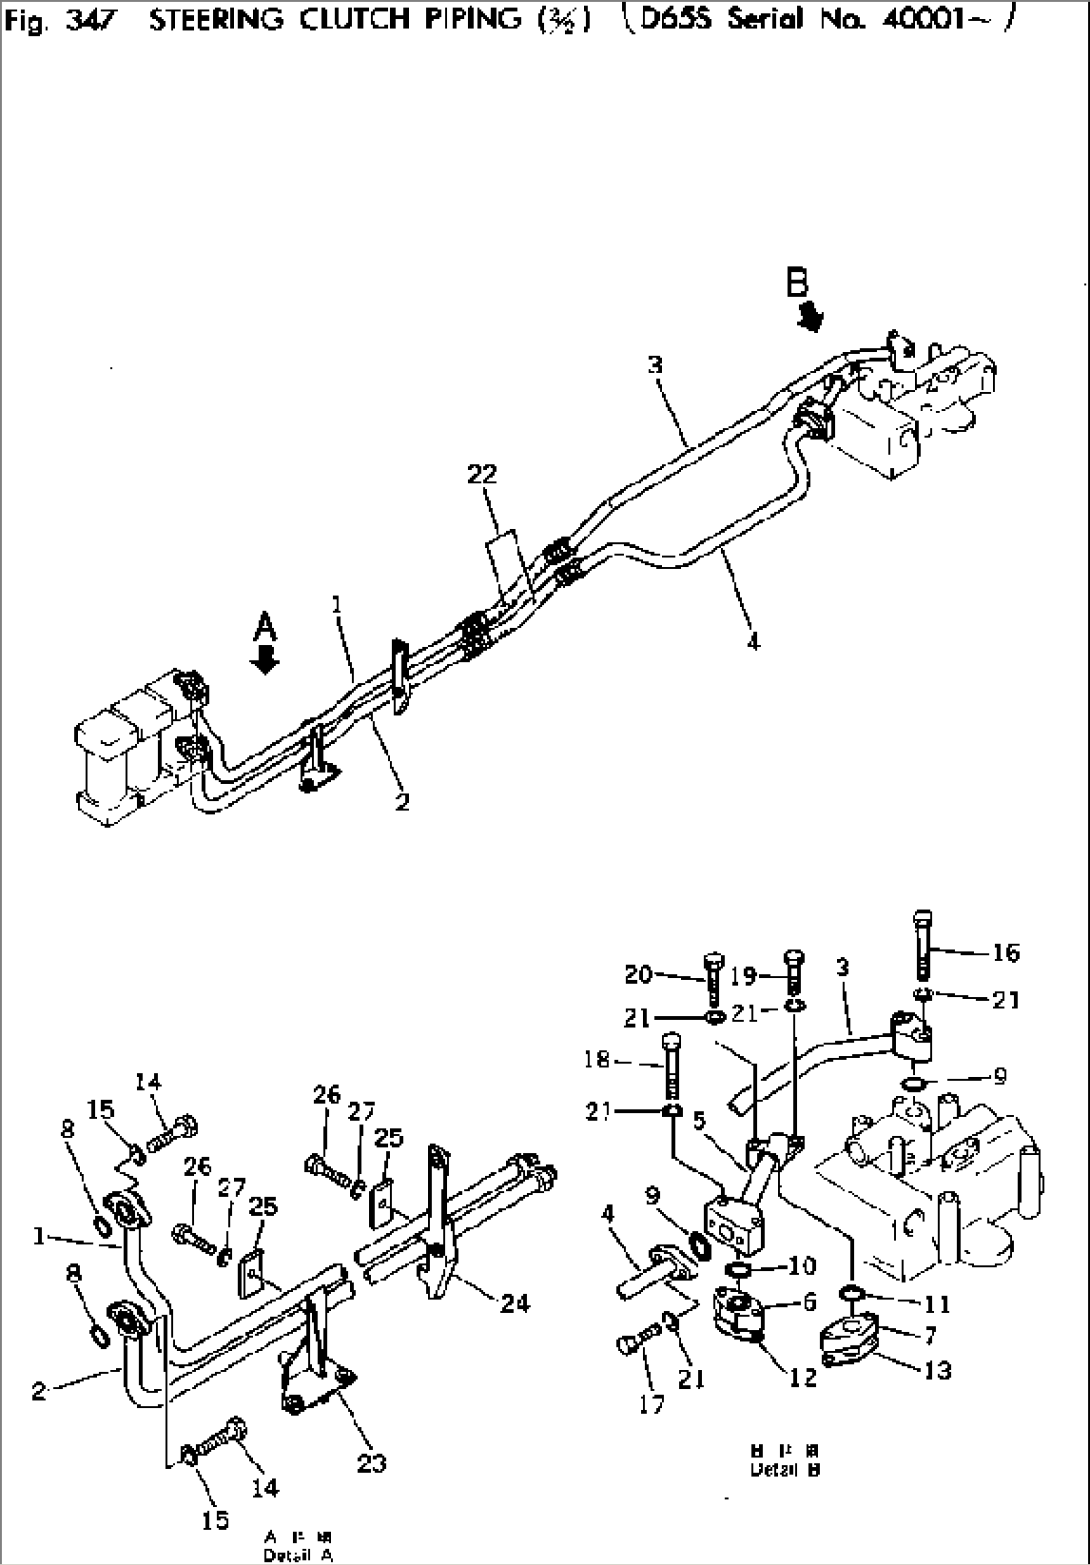 STEERING CLUTCH PIPING (2/2)